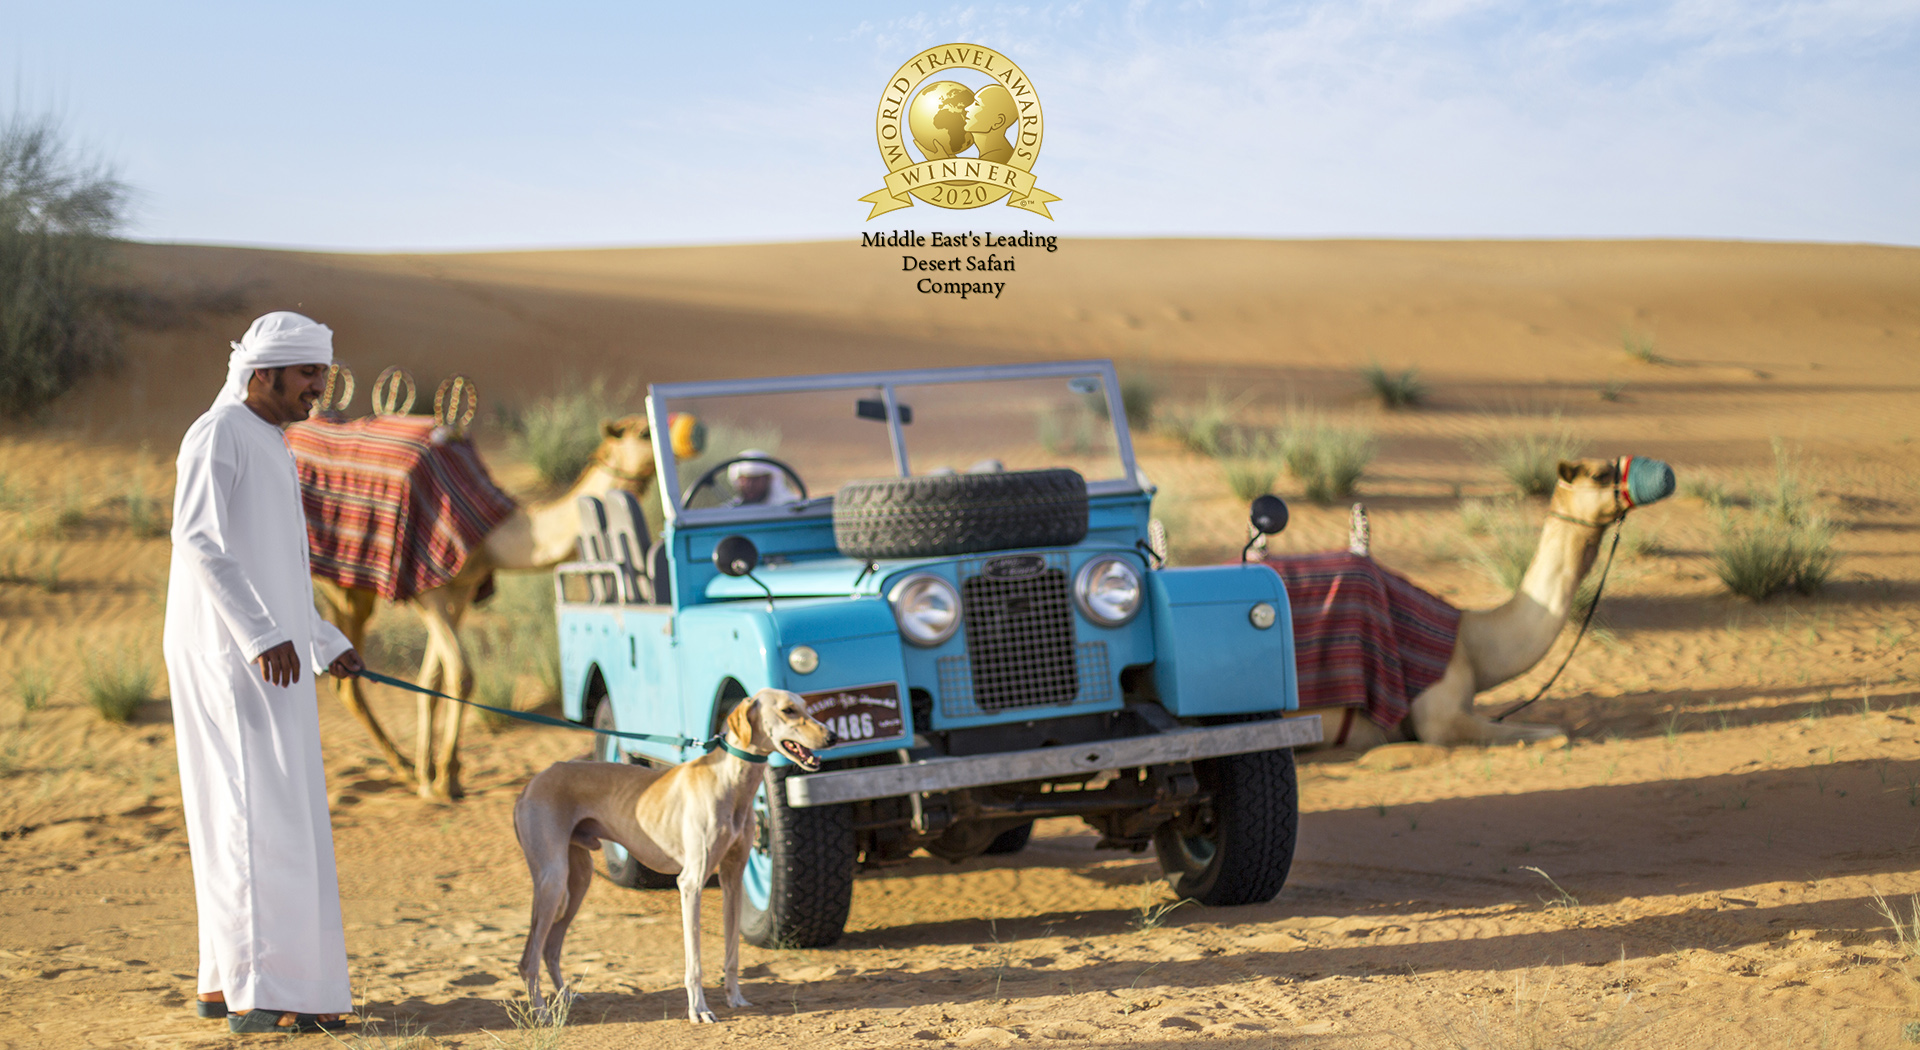 PLATINUM HERITAGE AWARDED AS MIDDLE EAST’S LEADING DESERT SAFARI COMPANY BY WORLD TRAVEL AWARDS